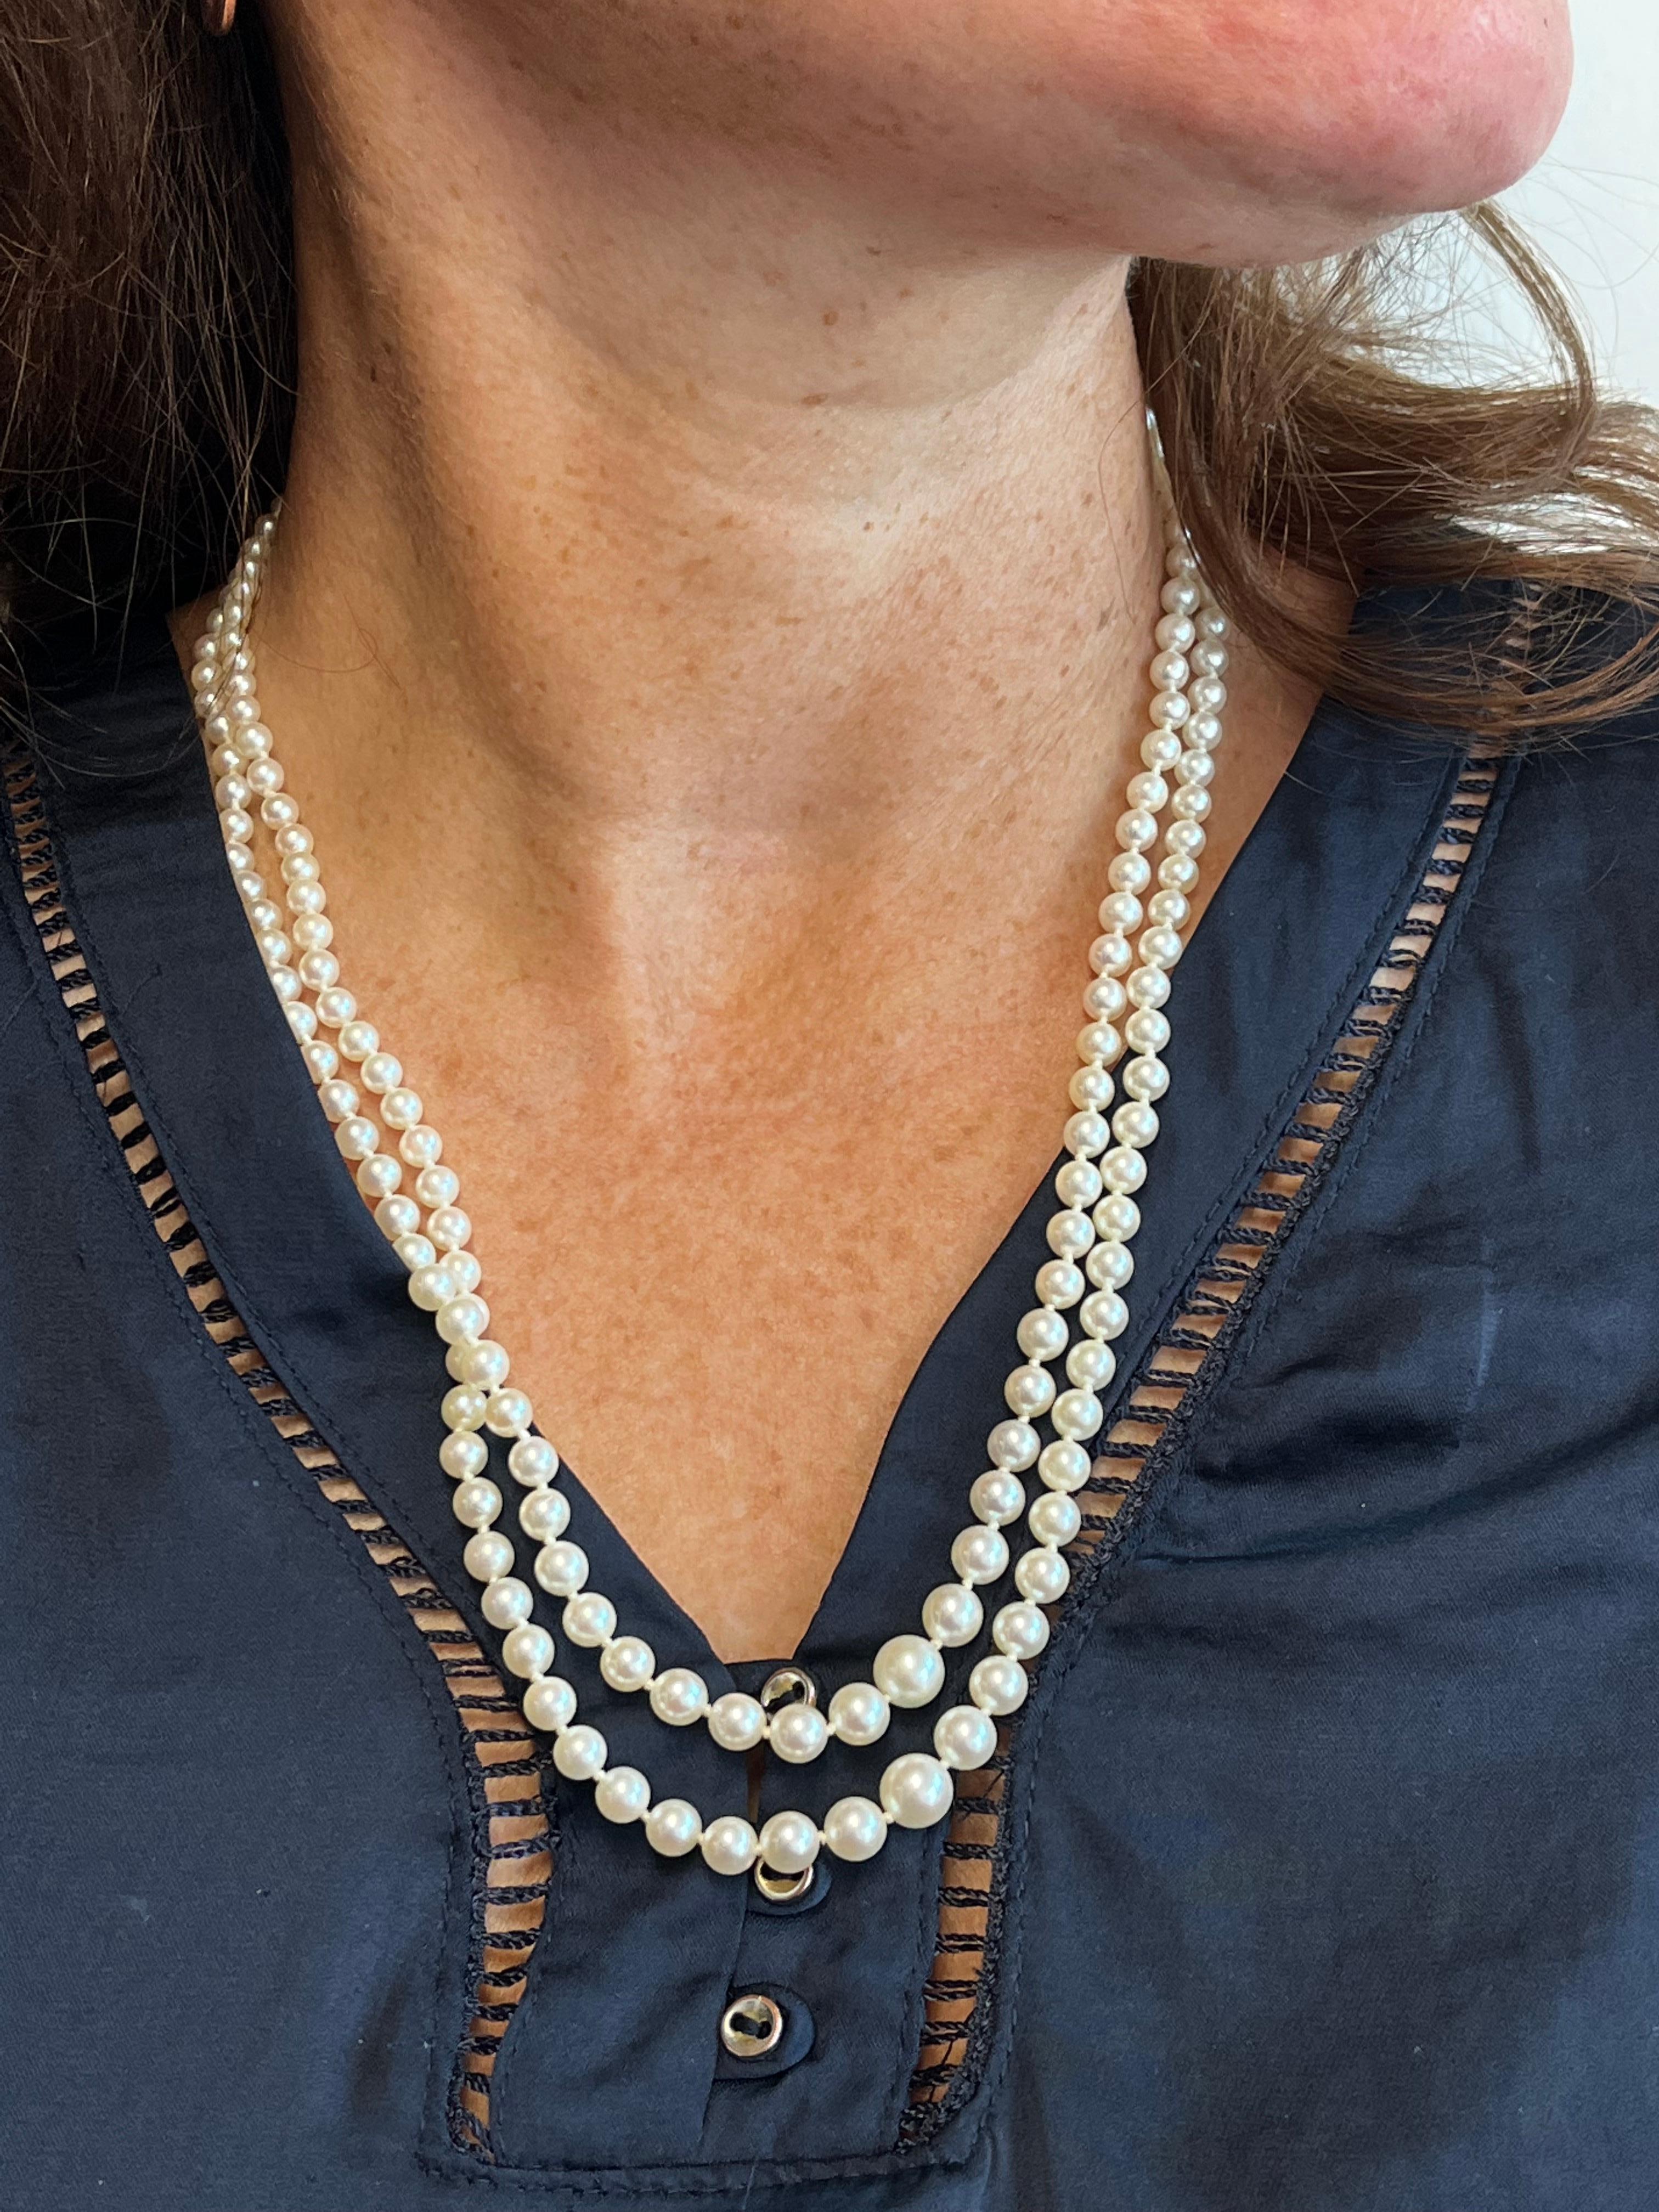 Mid-Century Japanese White Akoya Pearl Double Strand Necklace

Discover the allure of timeless elegance with this exquisite double strand necklace featuring Japanese white Akoya pearls. Hailing from the mid-last century, this piece is a testament to